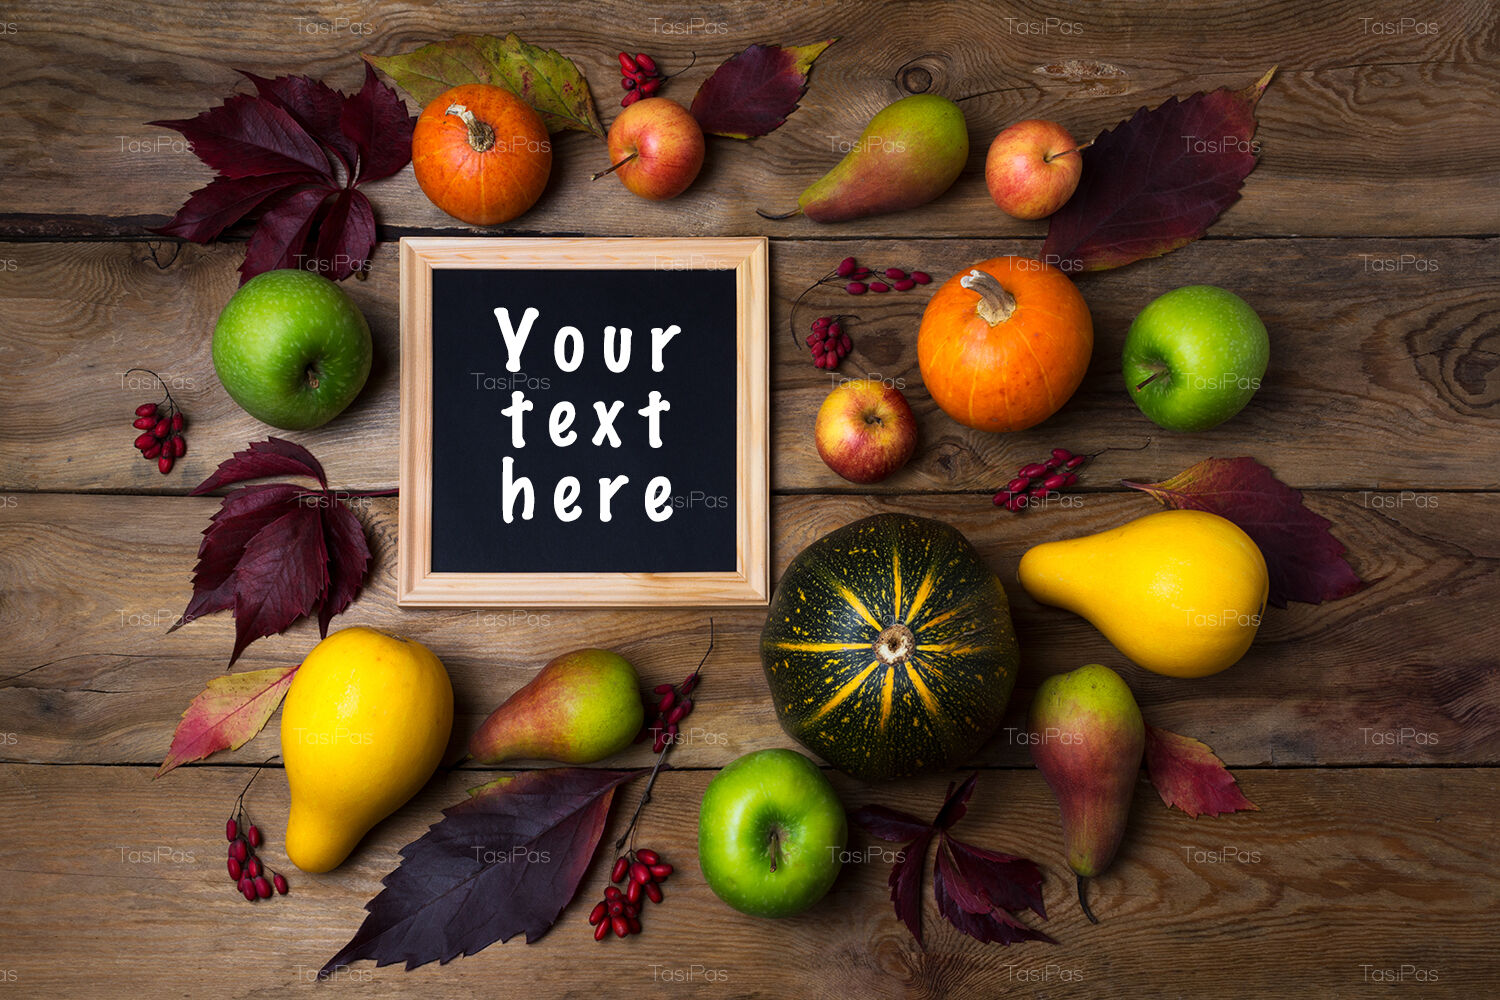 Download Rustic square frame mockup with pumpkins, pears By TasiPas | TheHungryJPEG.com